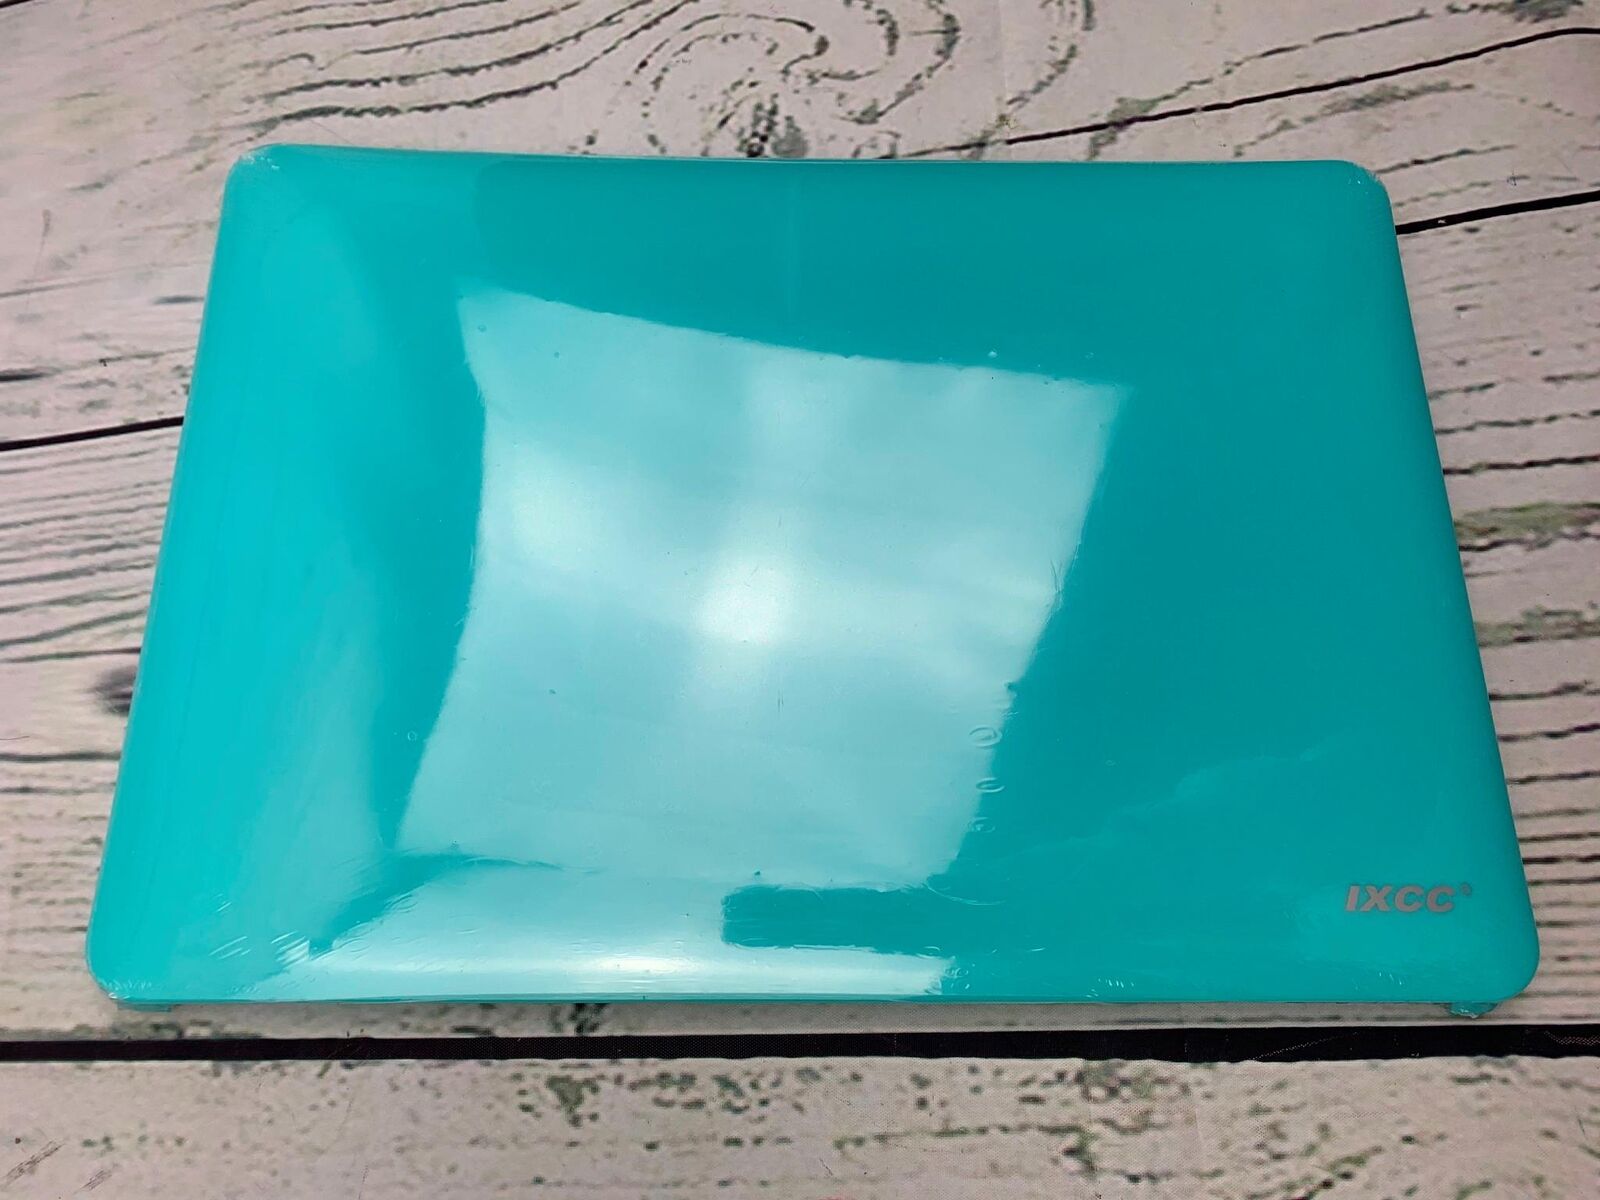 Air 13 in Case Smooth Finish Soft Touch Plastic Hard Shell 2 in 1 Tiffany Blue